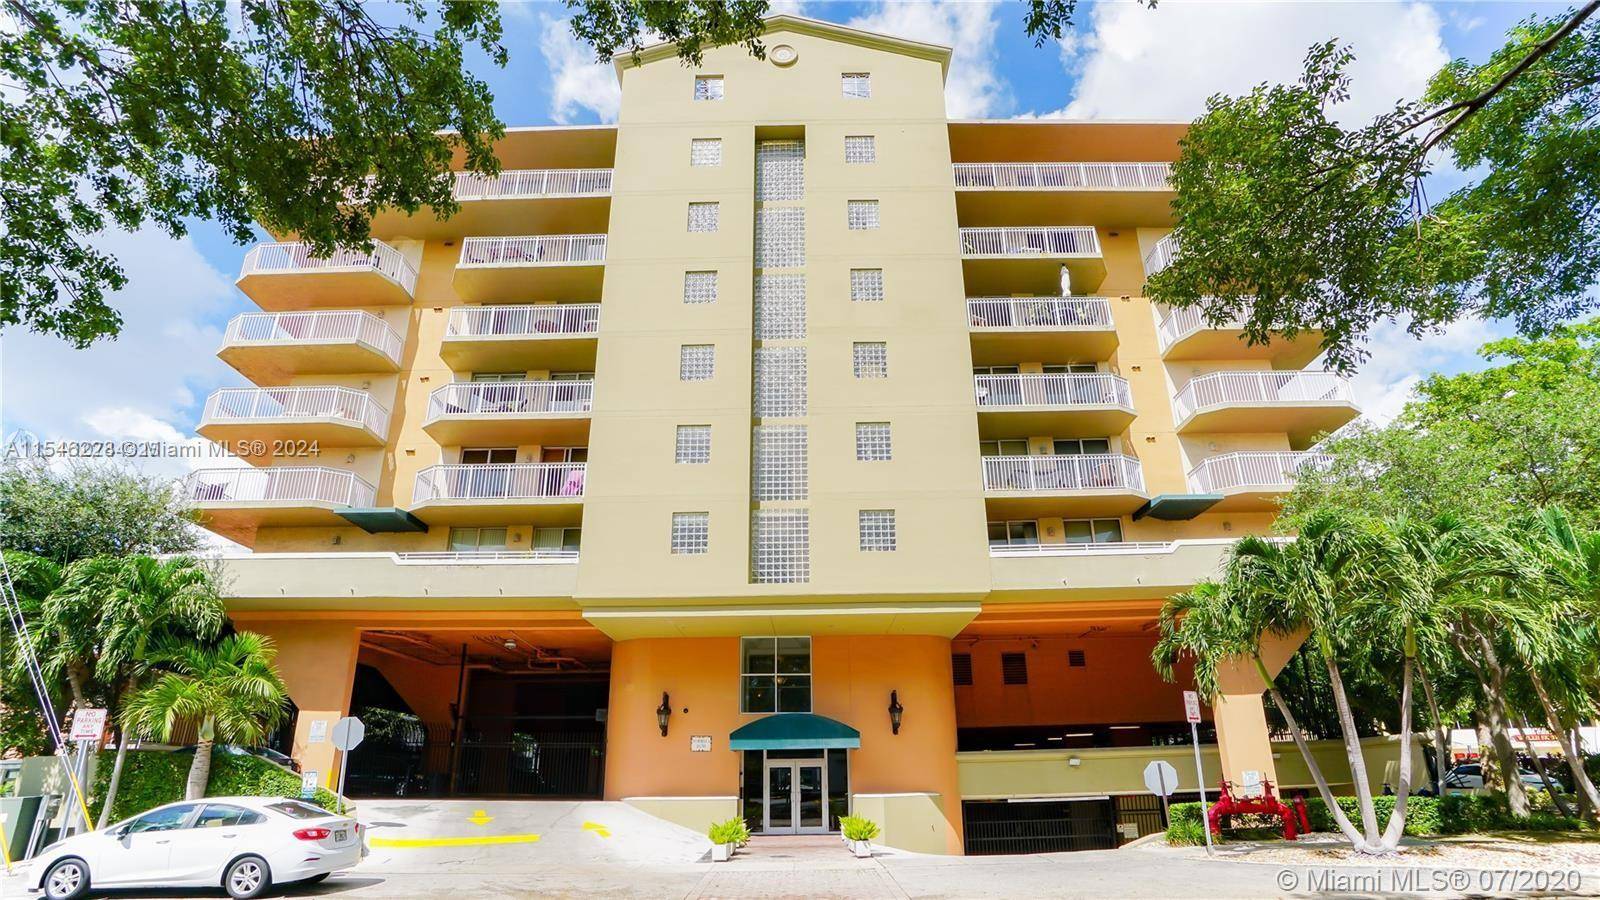 LOCATION LOCATION LOCATION THIS WELL LAYED OUT 2 BD 2 BTH CONDO is JUST OVER 1030 SQ FT, with AMPLE NATURAL LIGHT, NEW APPLIANCES AND TILED FLOORS THROUGHOUT.